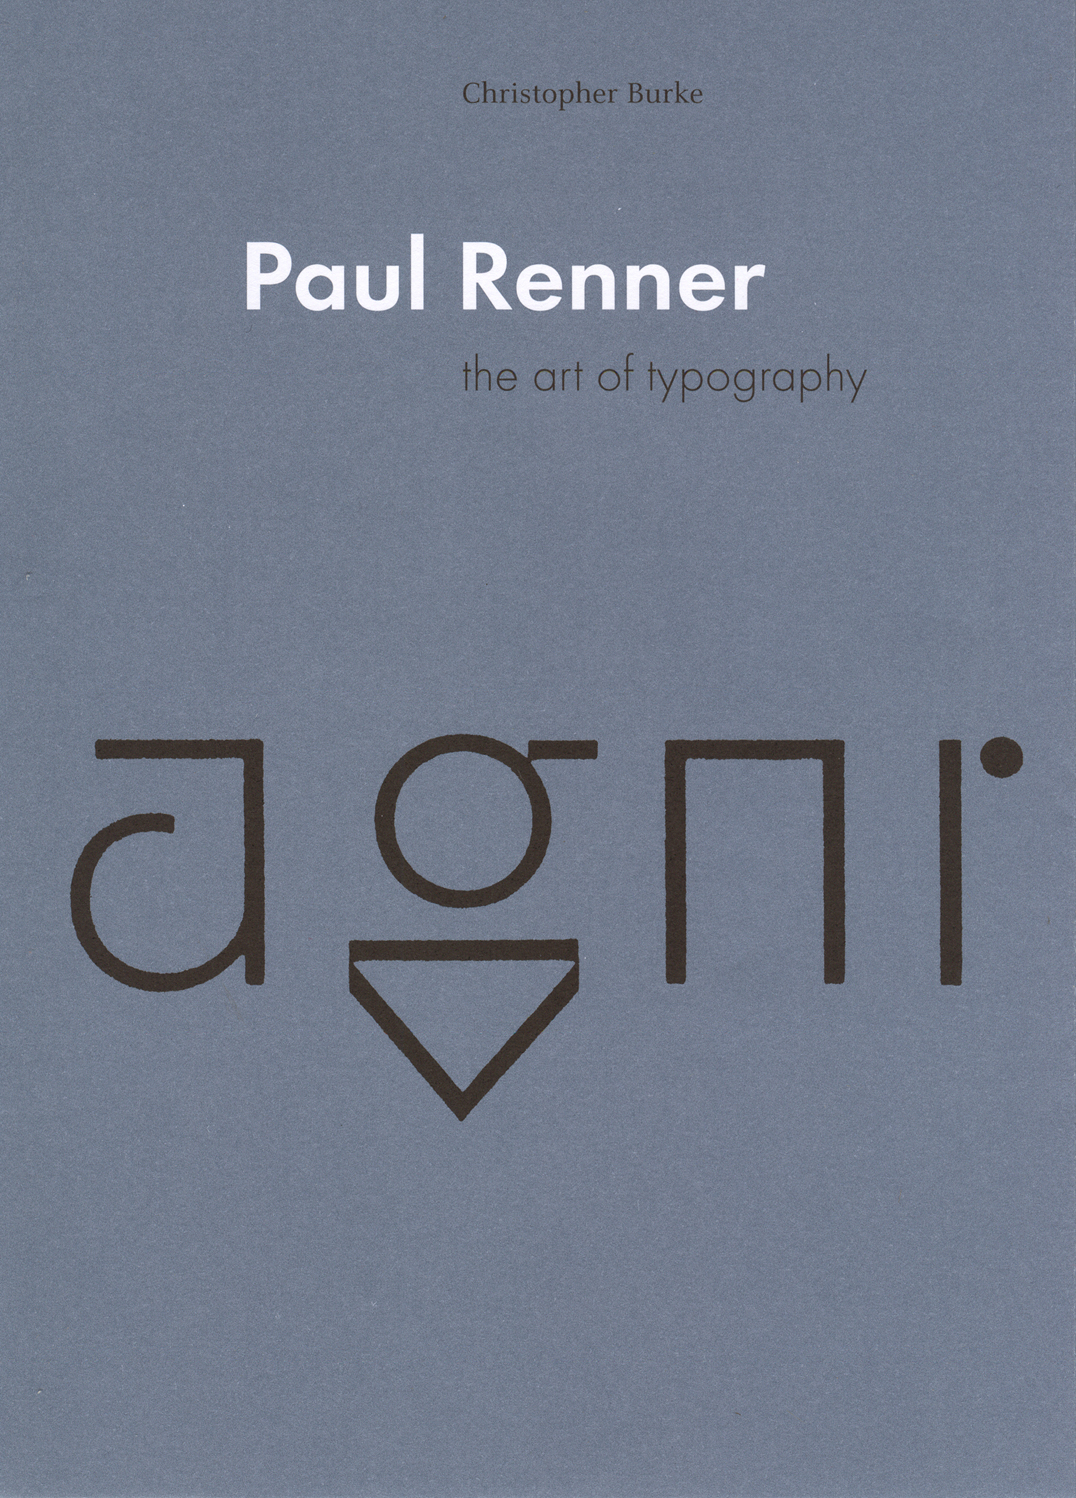 Paul Renner: the art of typography